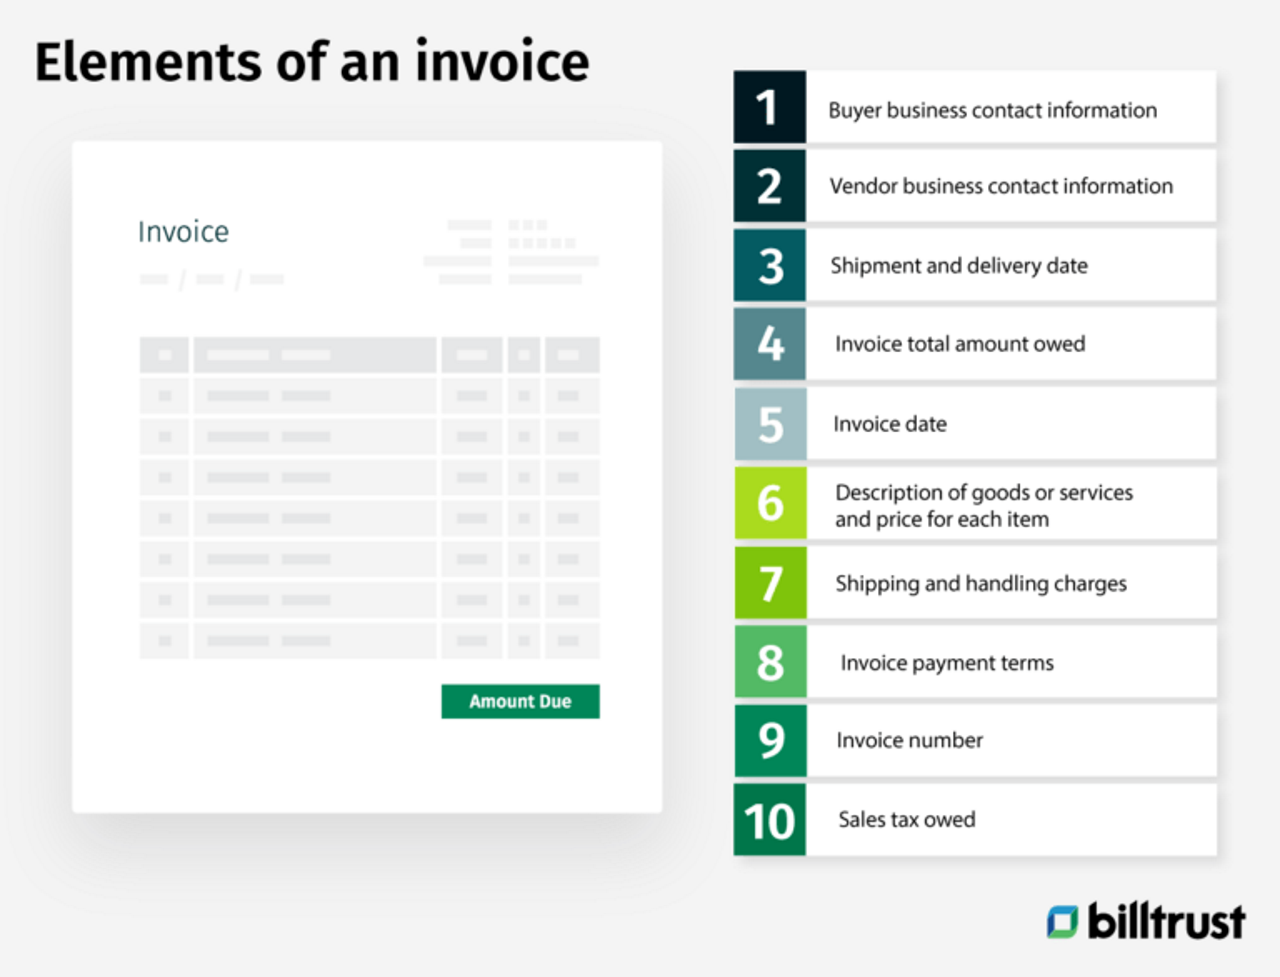 elements of an invoice: buyer and vendor business contact information, invoice total amount owed; invoice date, payment terms and number